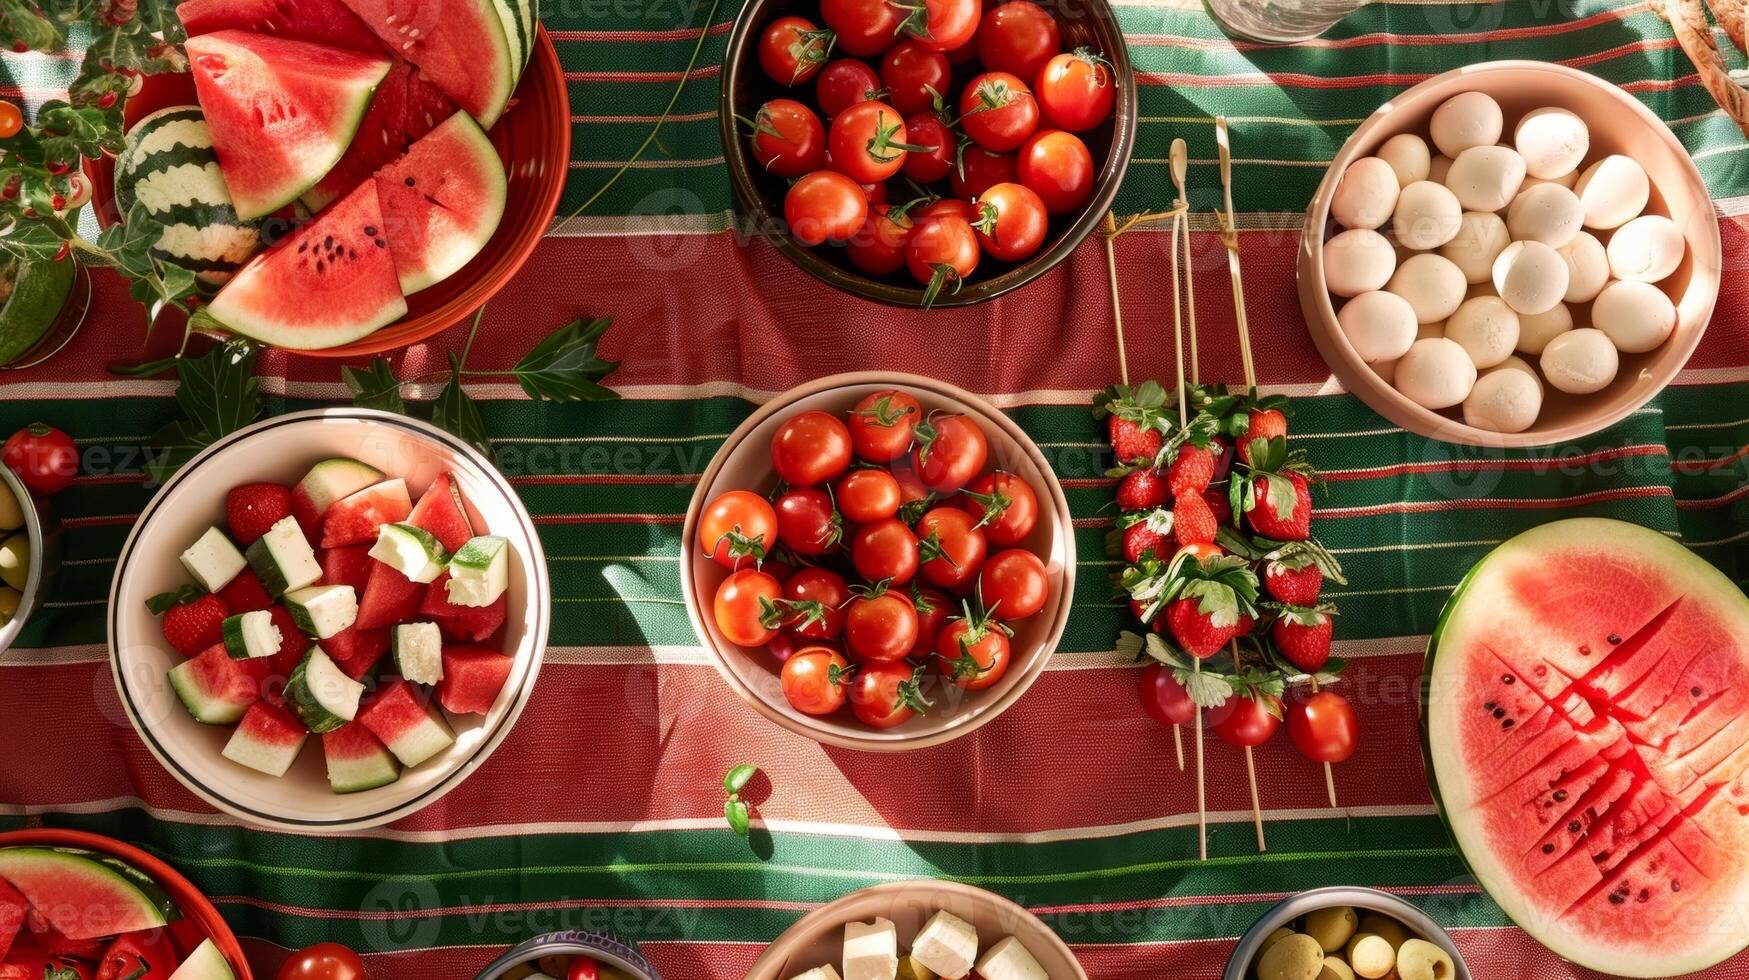 A table covered in red and green striped tablecloth adorned with bowls of watermelon balls and skewers of watermelon and feta cheese photo